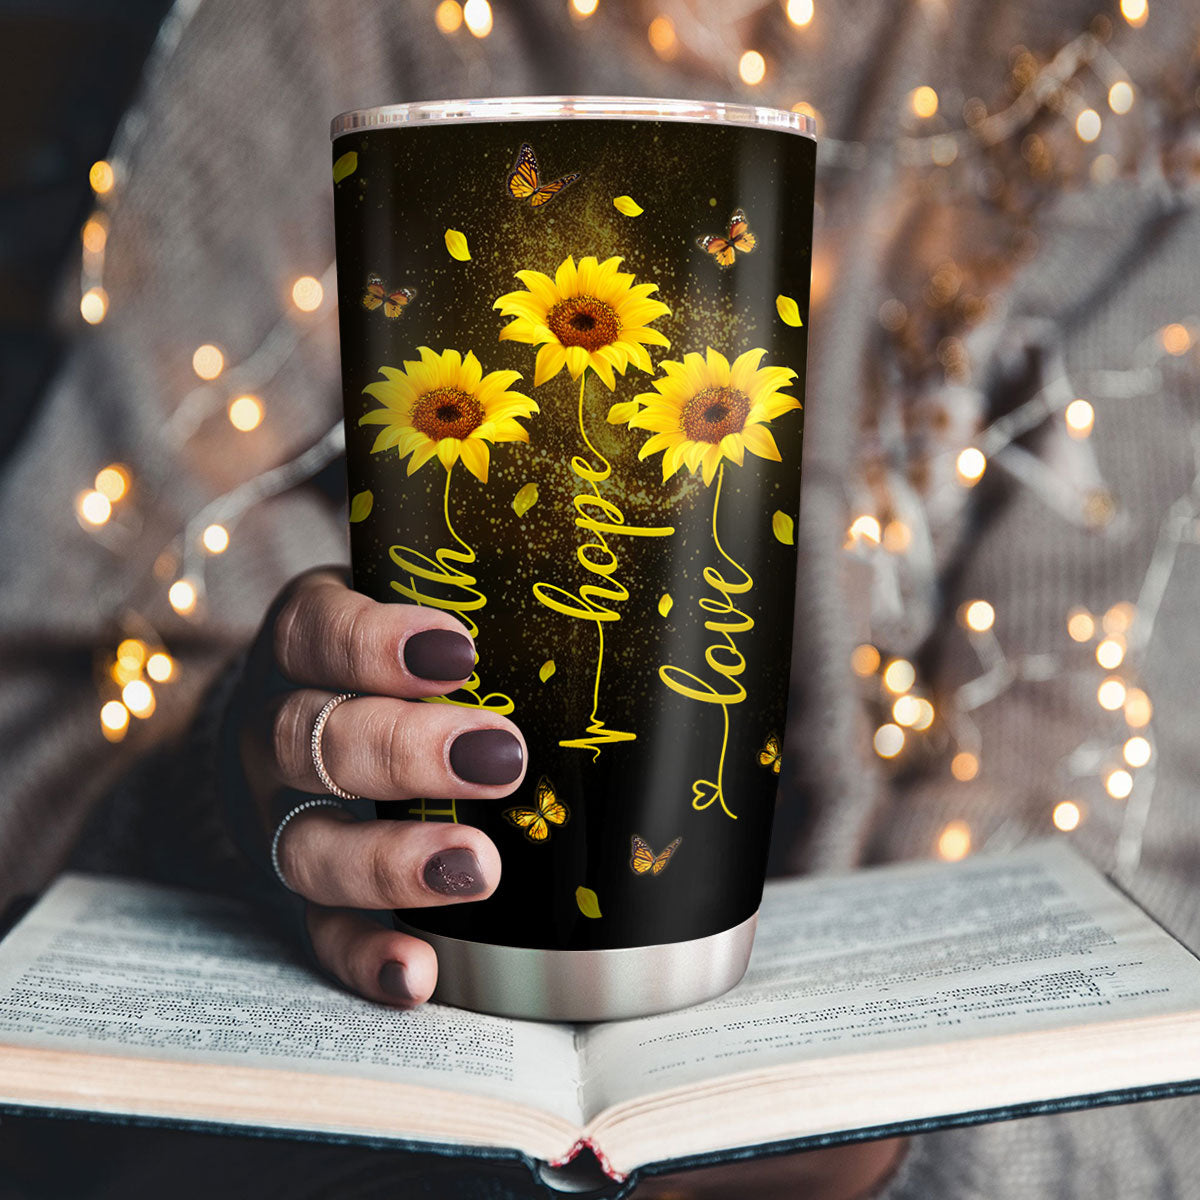 Personal Name Sunflower Heart - Engraved Stainless Steel Sunflower Tumbler,  Insulated Travel Mug, Cute Gift For Her